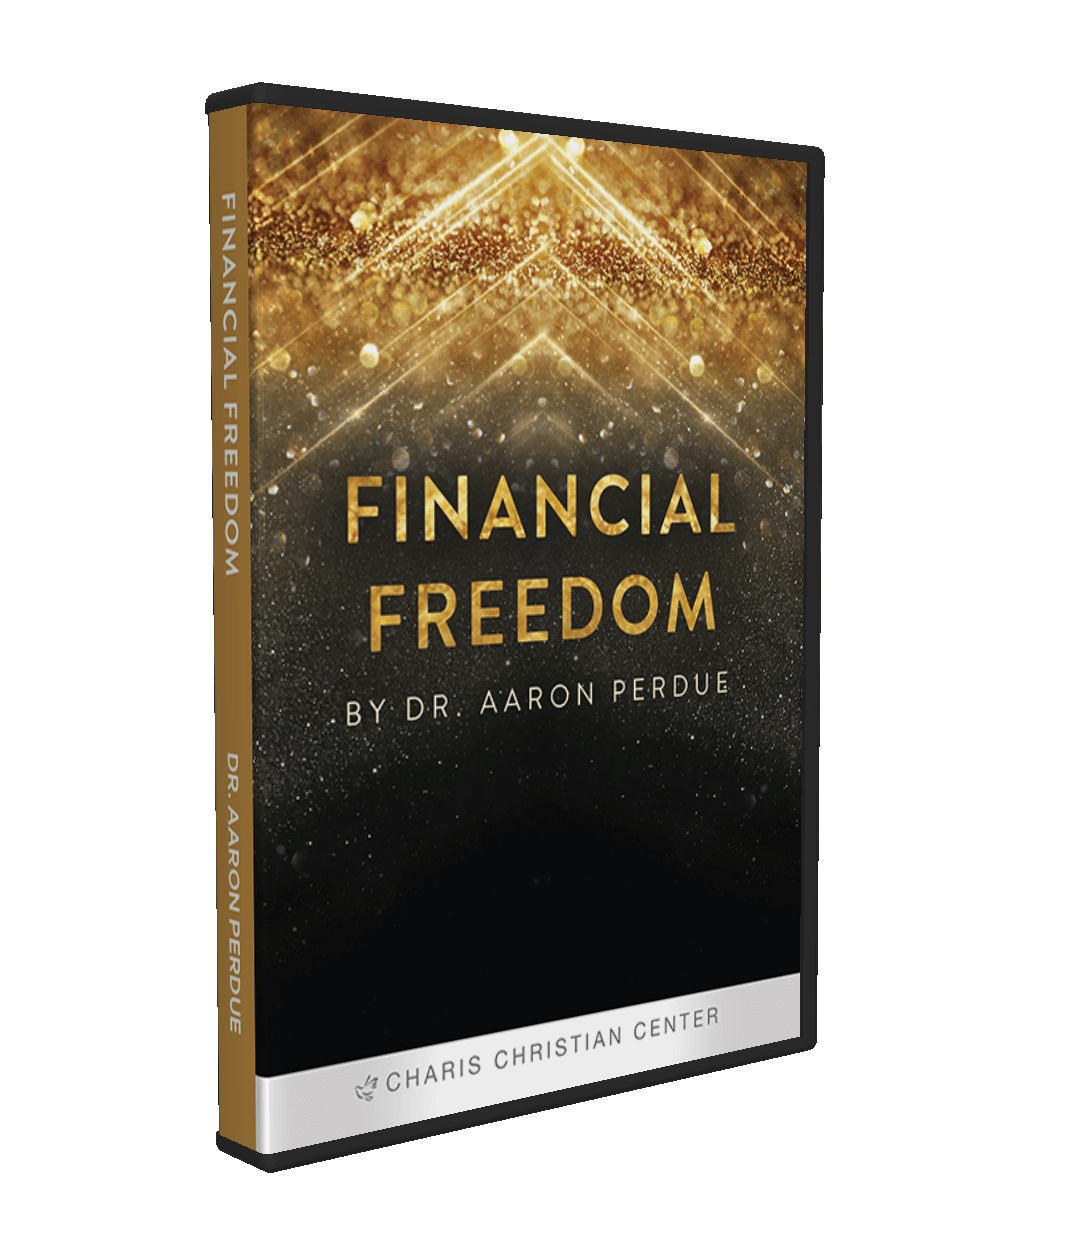 Financial Freedom 4 CD Set from Dr. Aaron Perdue